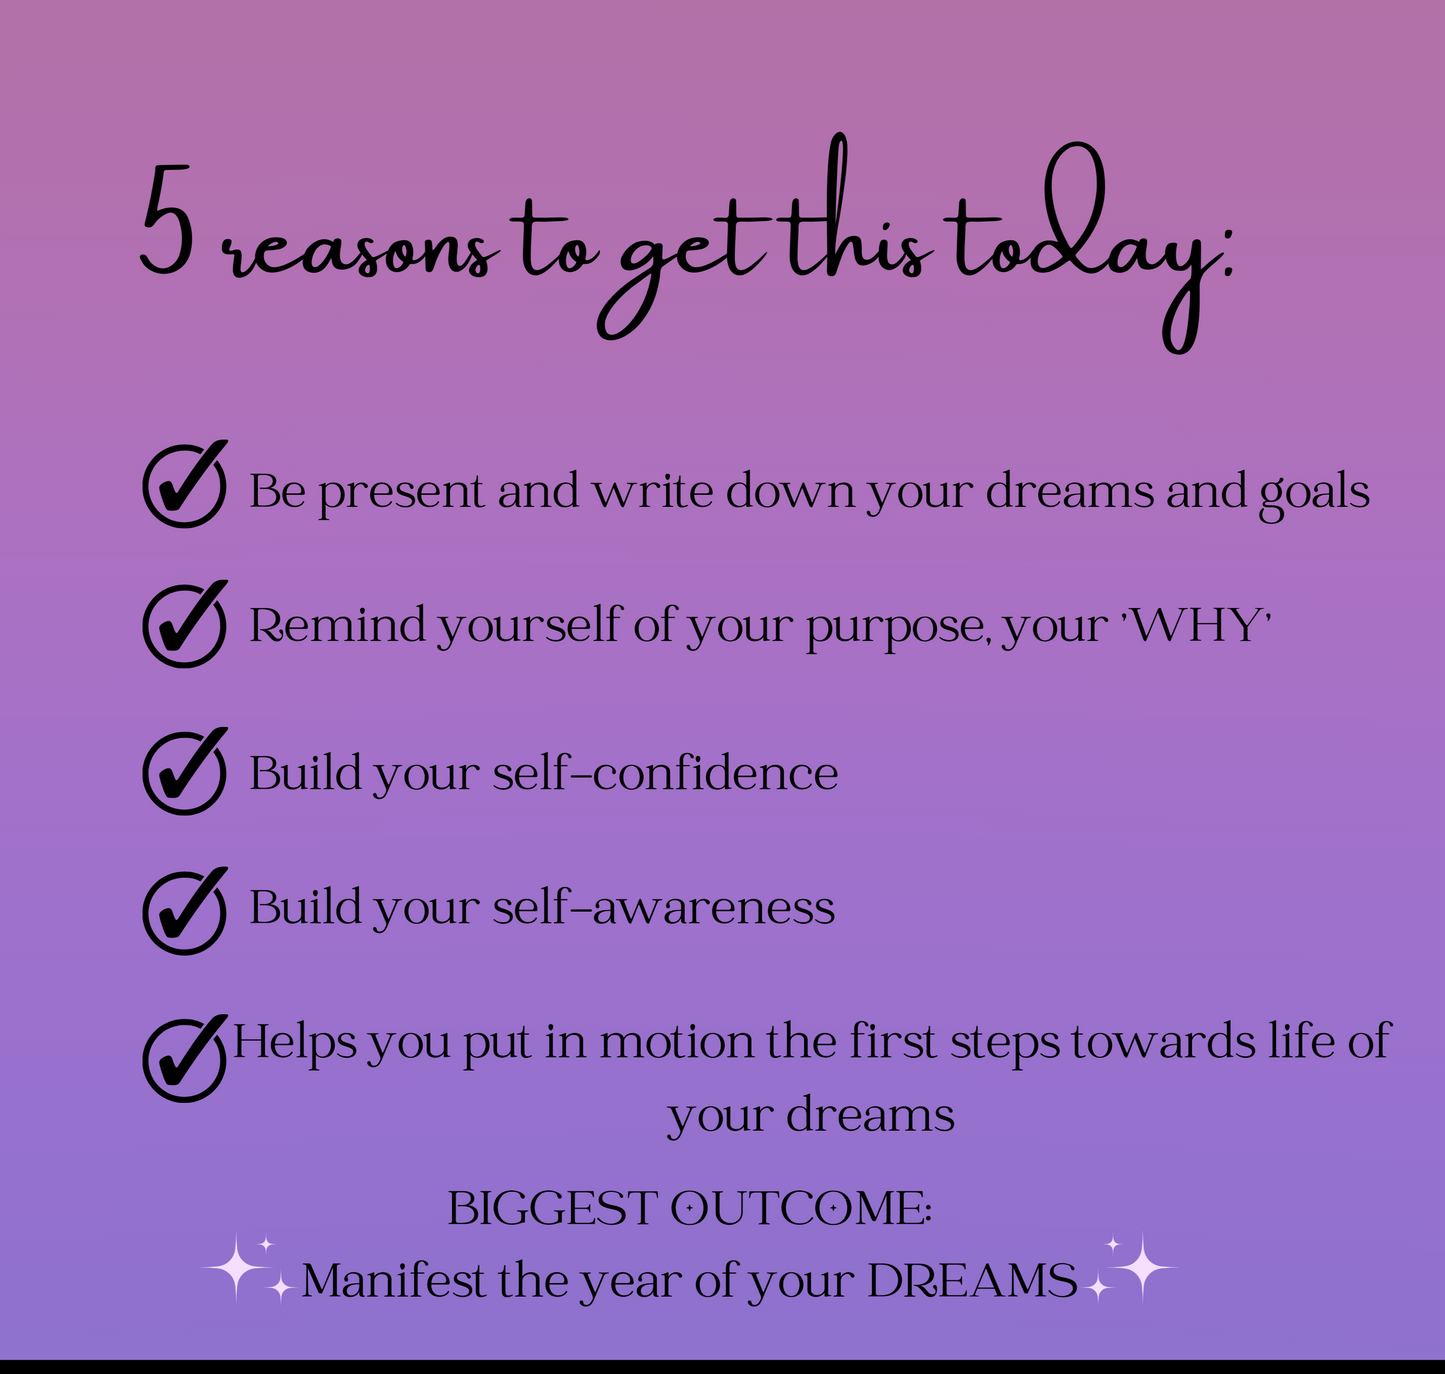 here are 5 reasons to get this manifestation letter today: be present and write down your dreams and goals. remind yourself your purpose and your why. build your self-confidence and self-awareness. this manifestation letter puts in motion the first steps towards a life of your dreams.